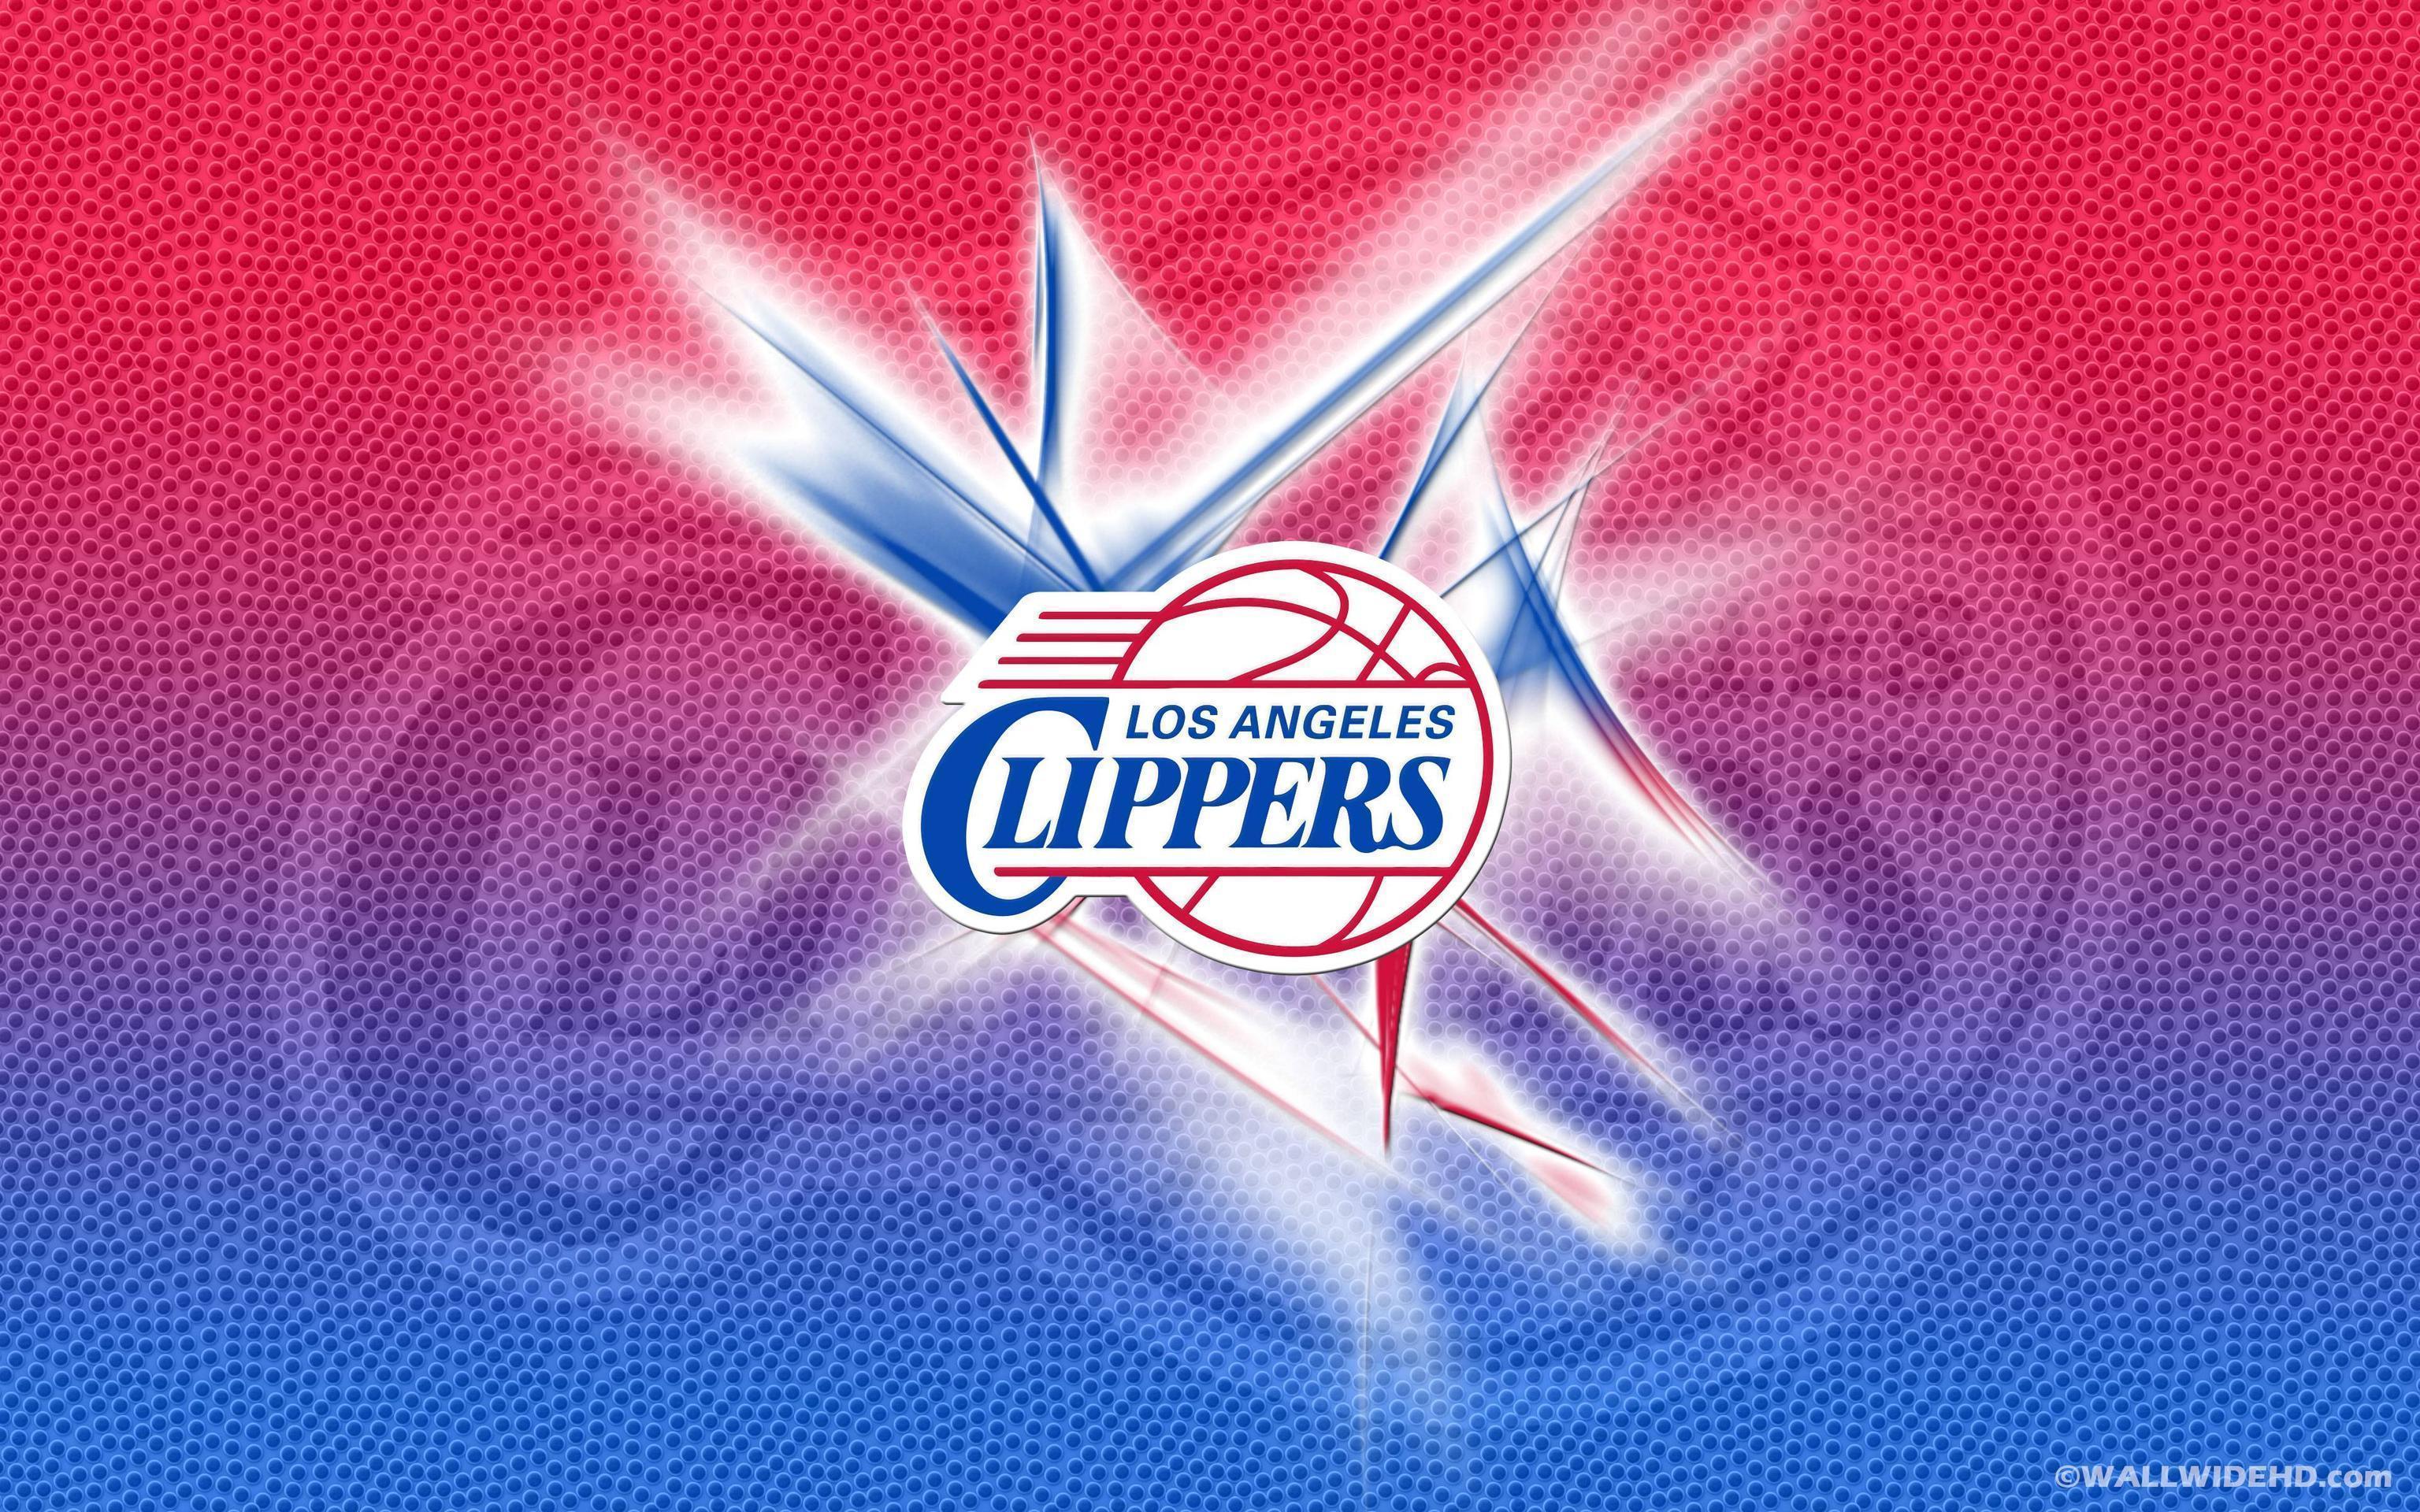 Los Angeles Clippers 2014 Logo NBA Wallpaper Wide or HD. Sports